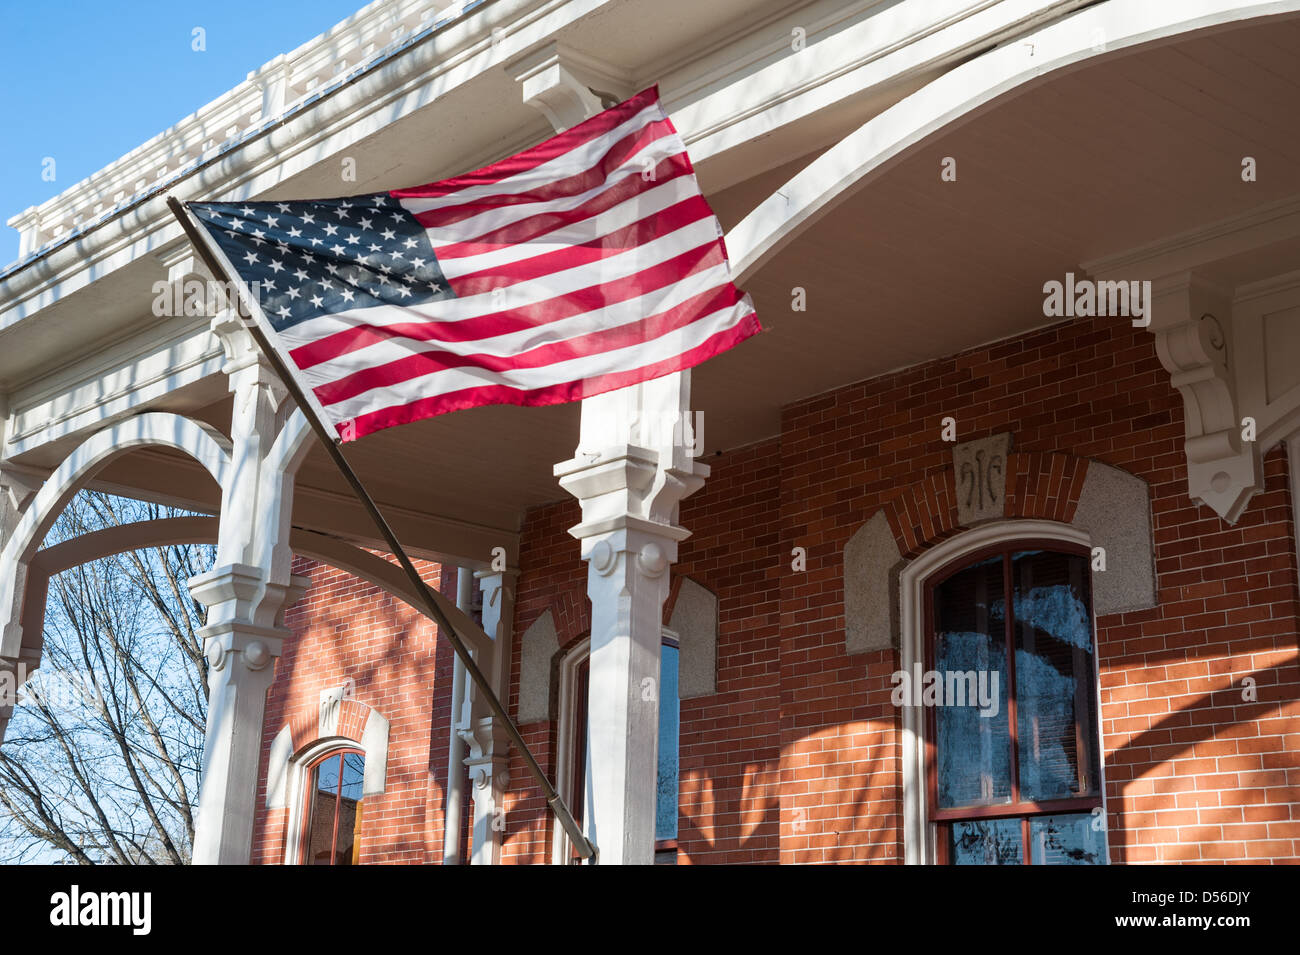 American flag waving from the porch posts of the Historic Walton County Courthouse on the square in downtown Monroe, Georgia. Stock Photo